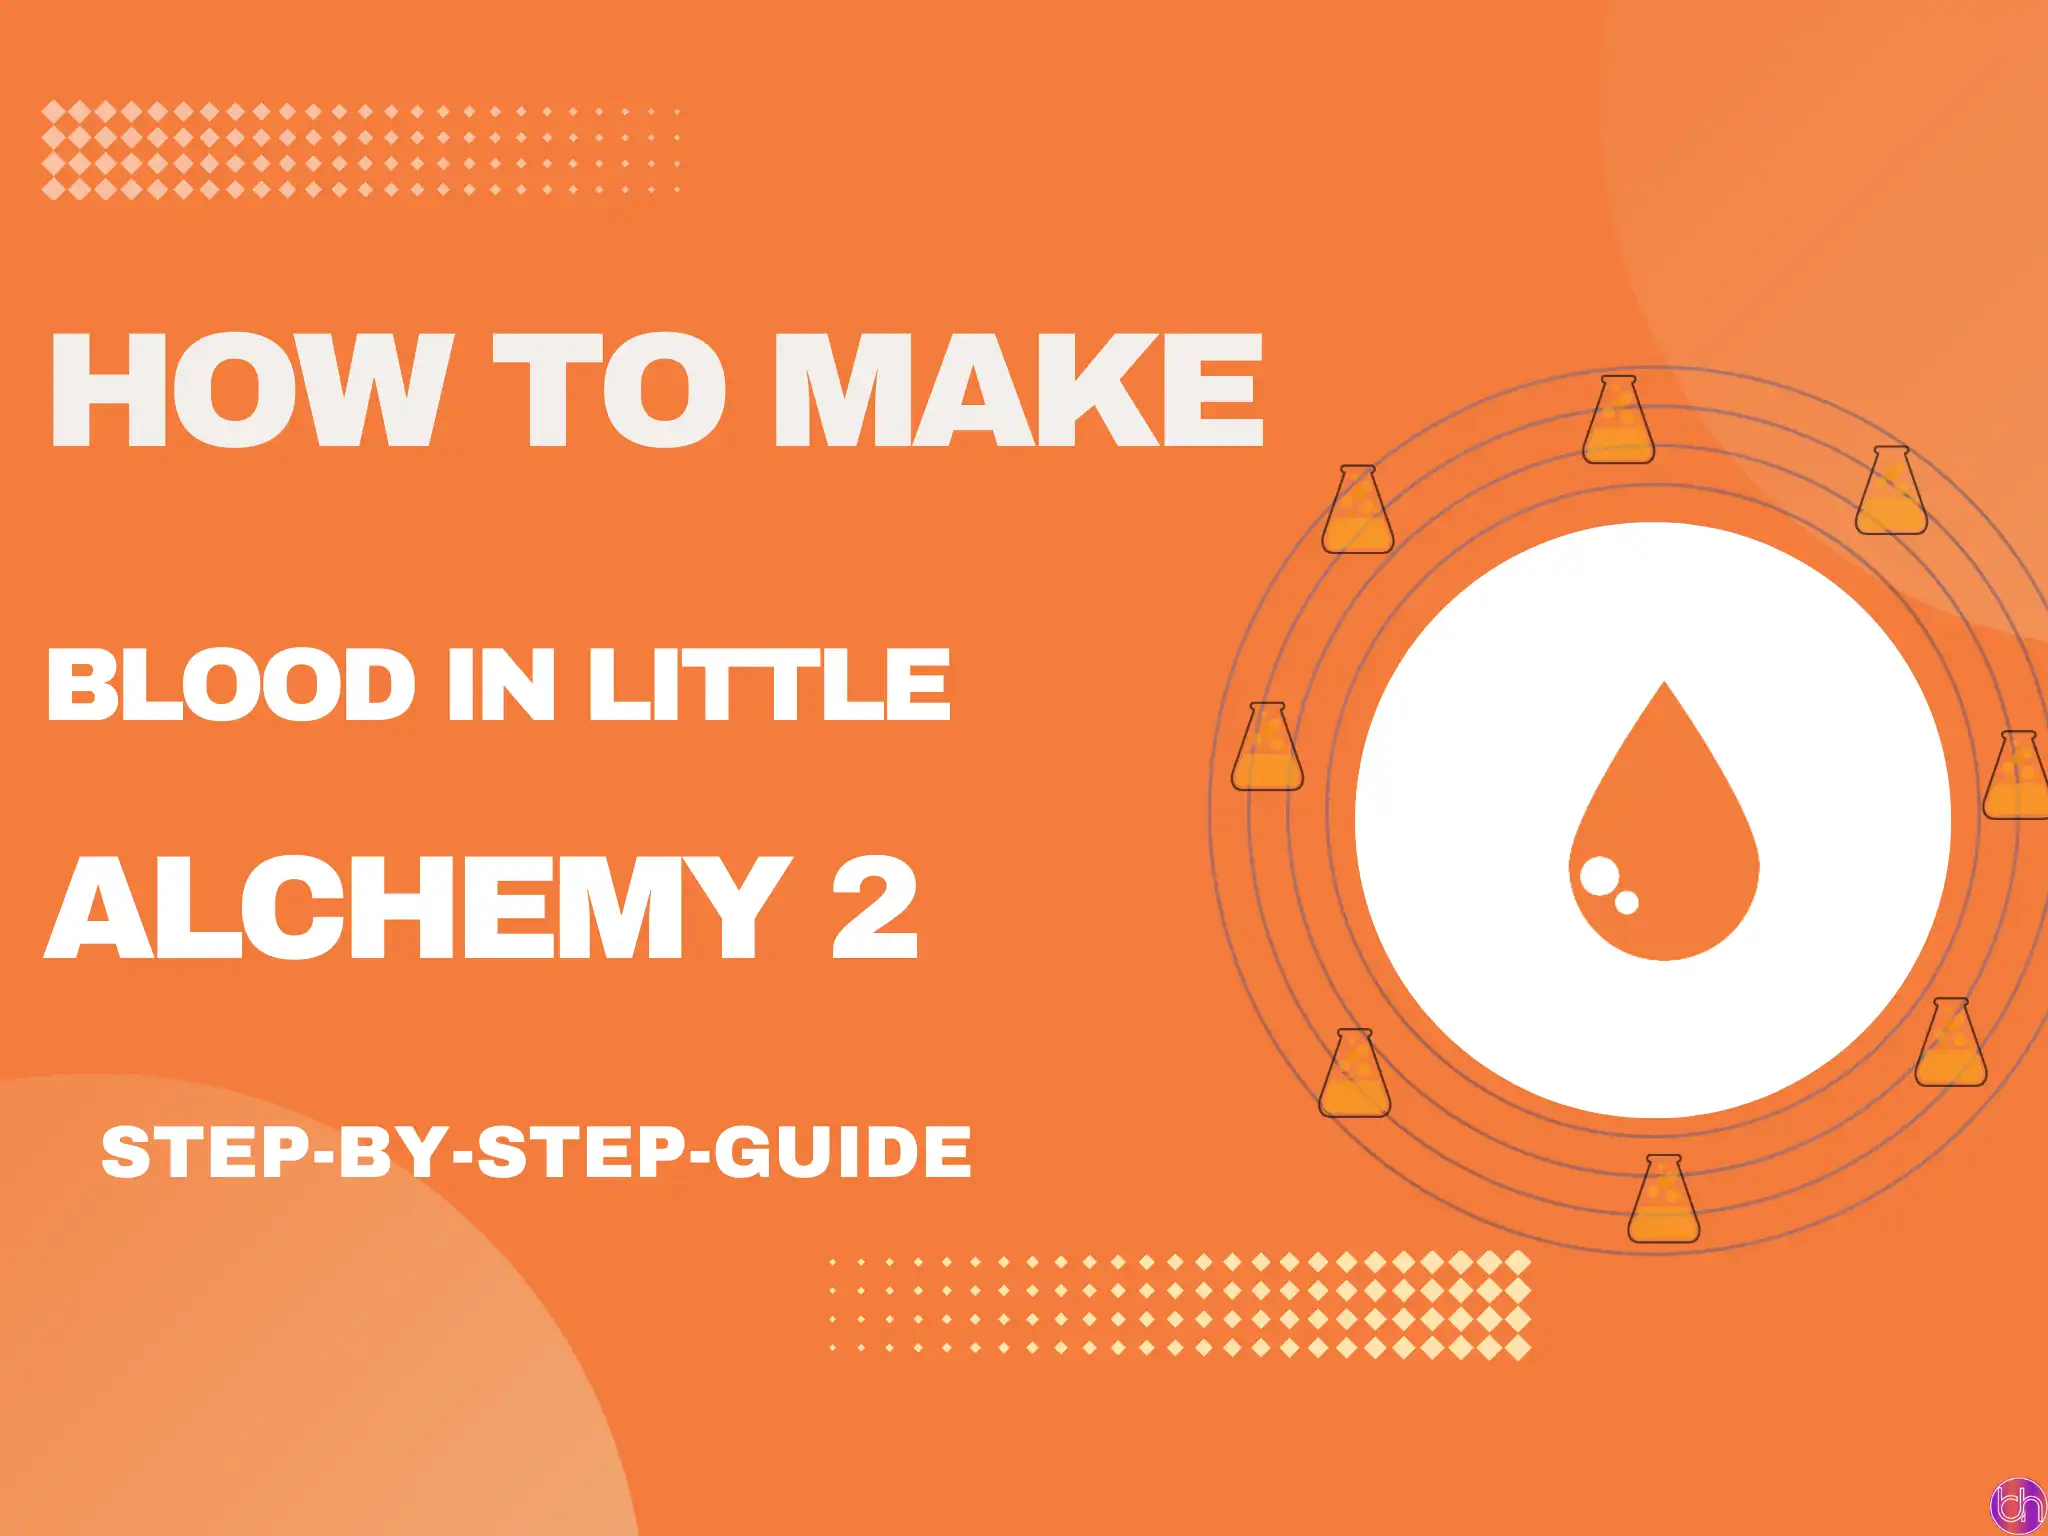 how to make blood in little alchemy 2